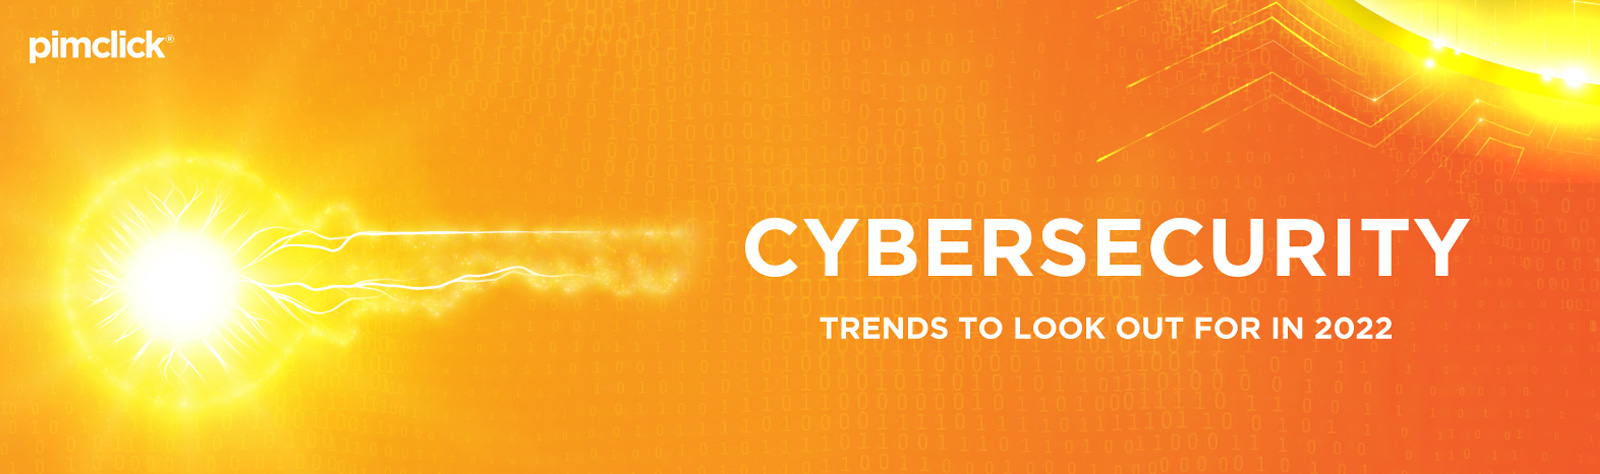 Cybersecurity trends to look out for in